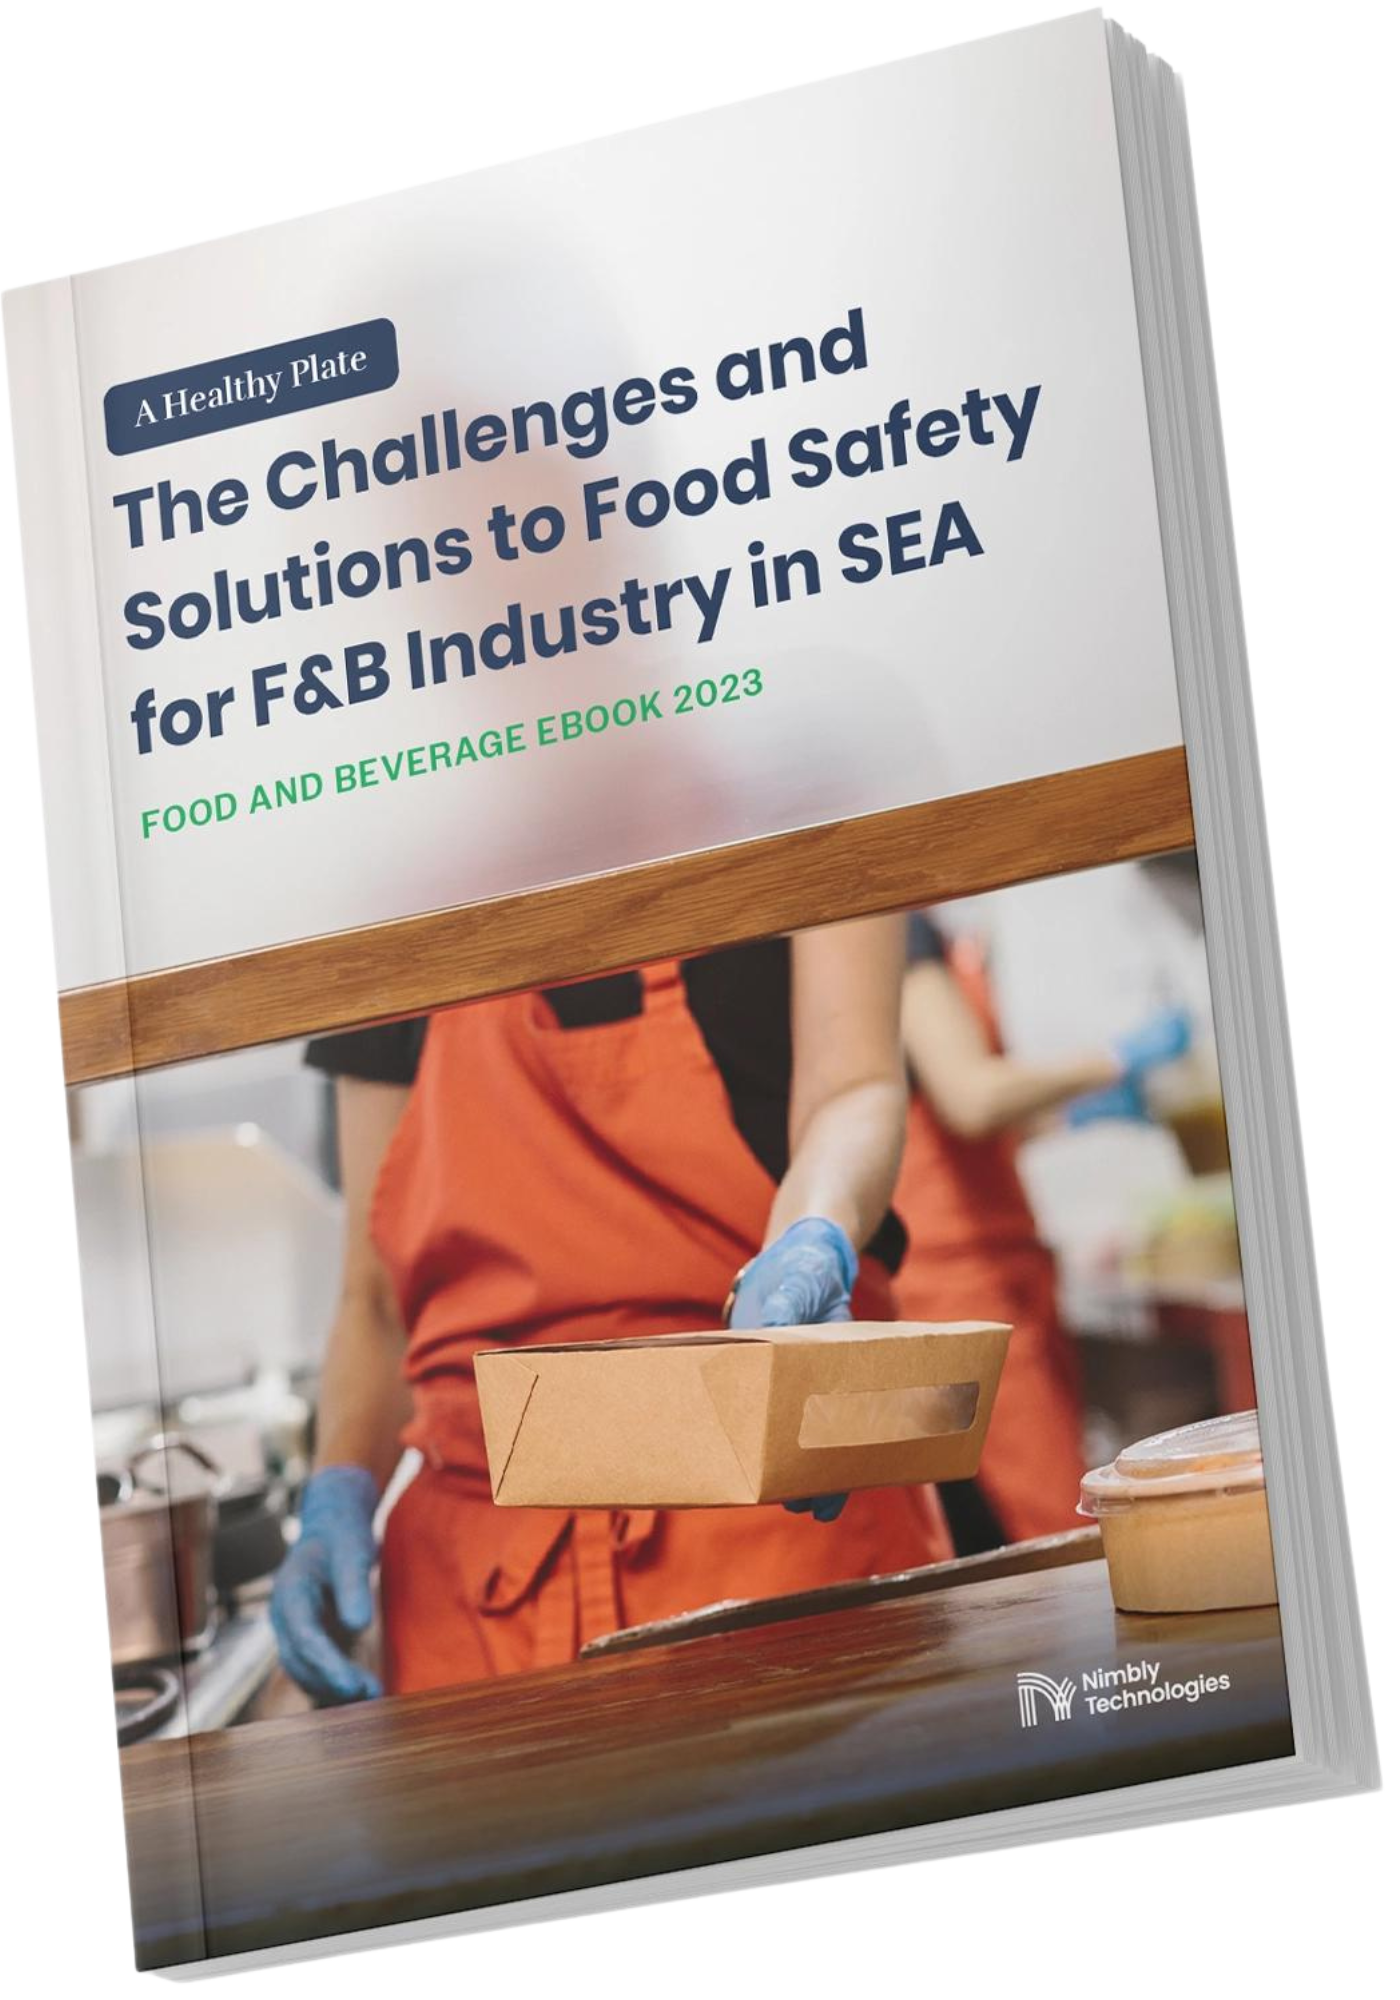 A healthy Plate: Challenges and solutions to food safety for F&B Industry in South east asia